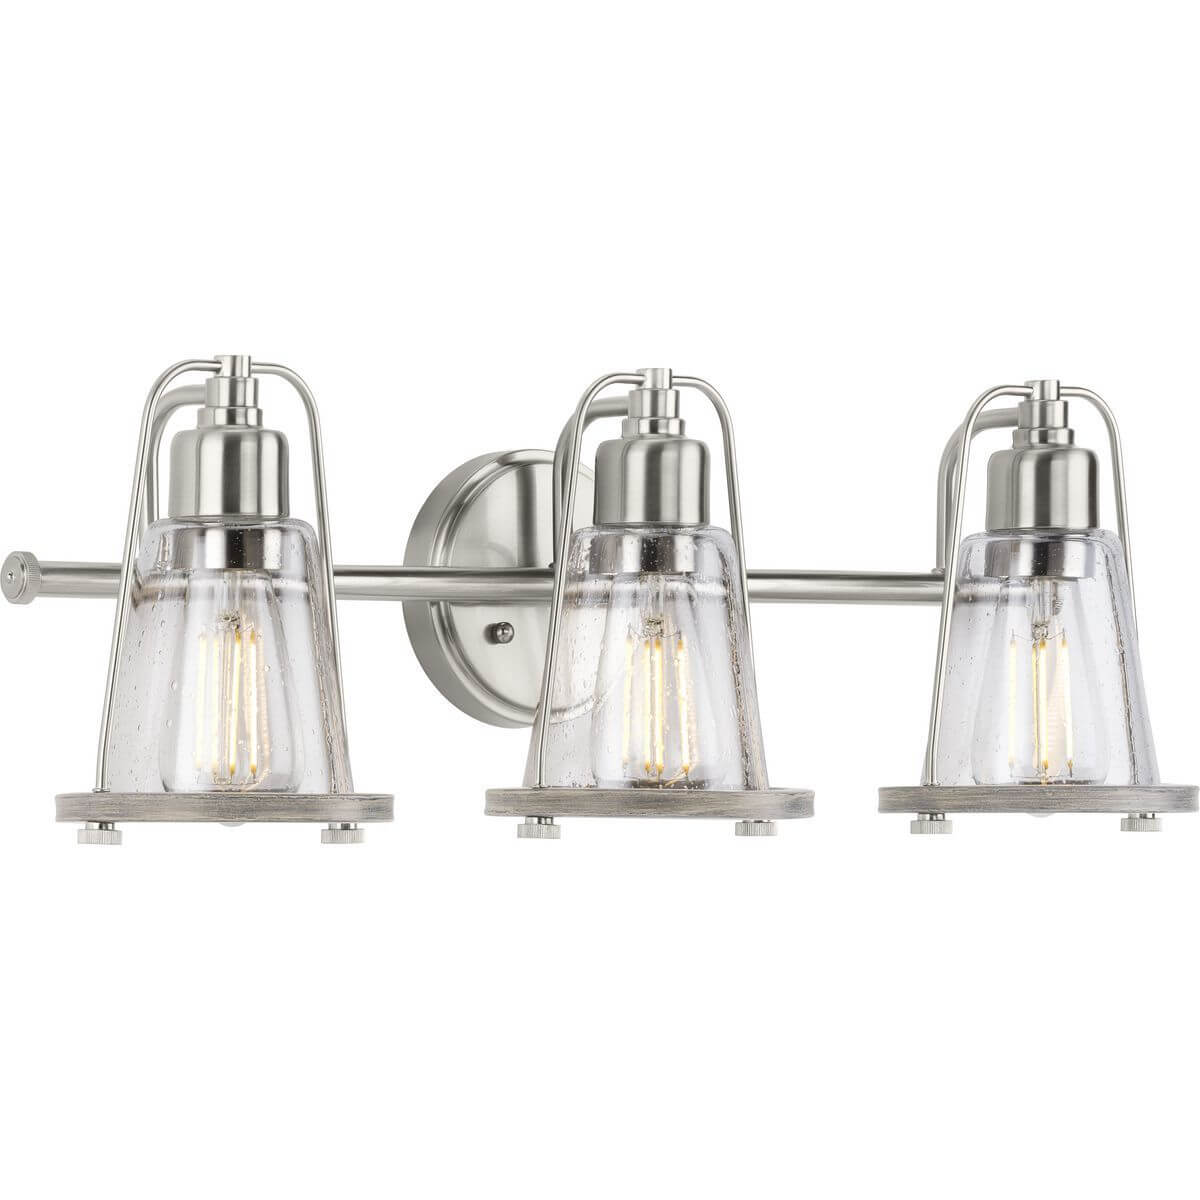 Progress Lighting P300297-009 Conway 3 Light 24 inch Bath Vanity Light in Brushed Nickel with Clear Seeded Glass